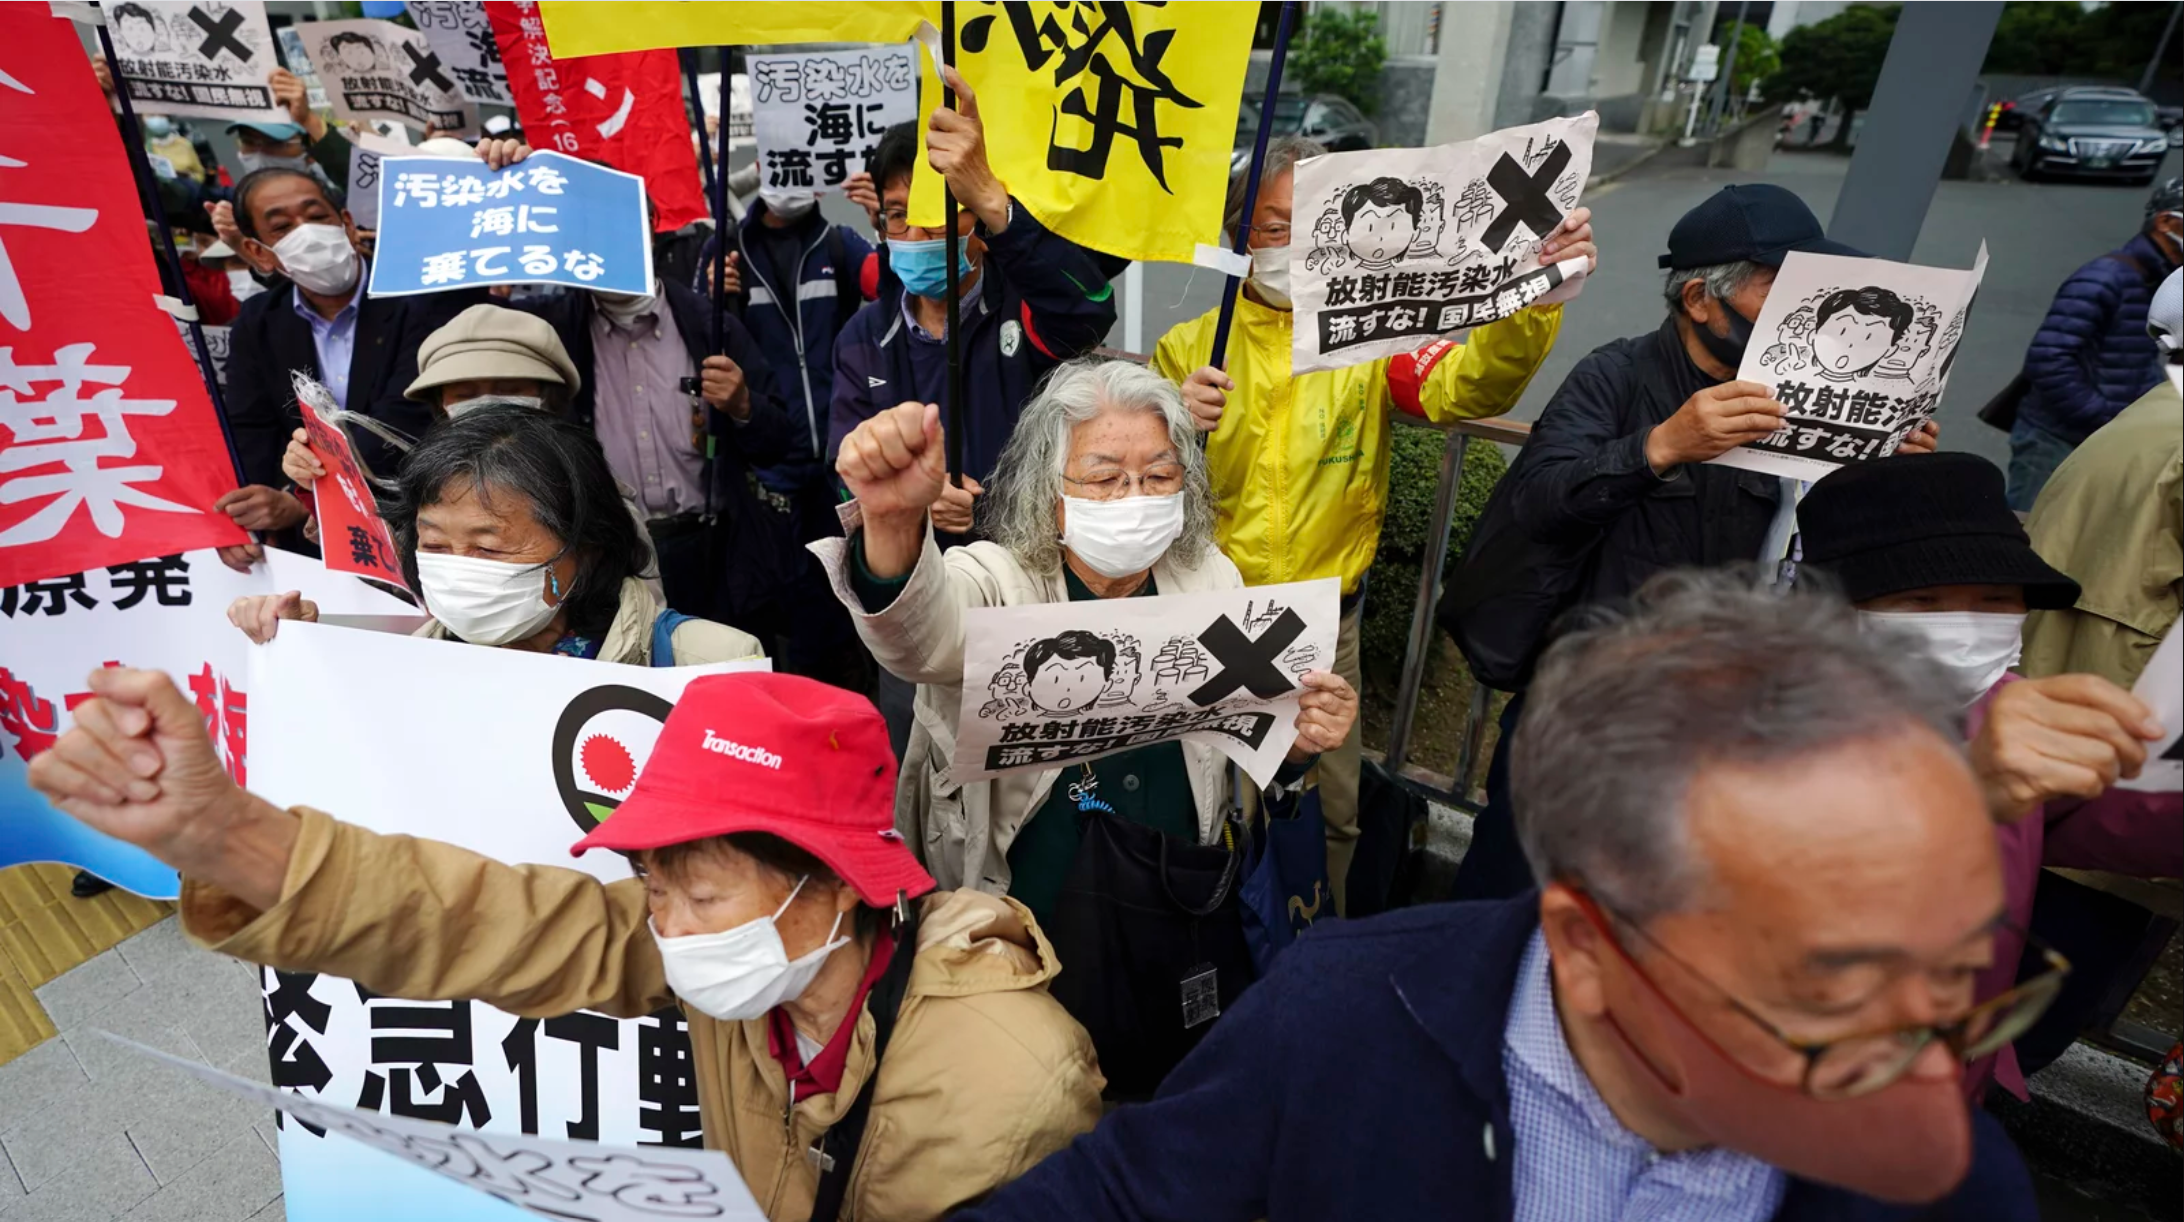 People in Tokyo protest a decision to start releasing into the ocean massive amounts of treated wastewater from the Fukushima nuclear plant. The plant was damaged in a 2011 earthquake and tsunami. Eugene Hoshiko/AP